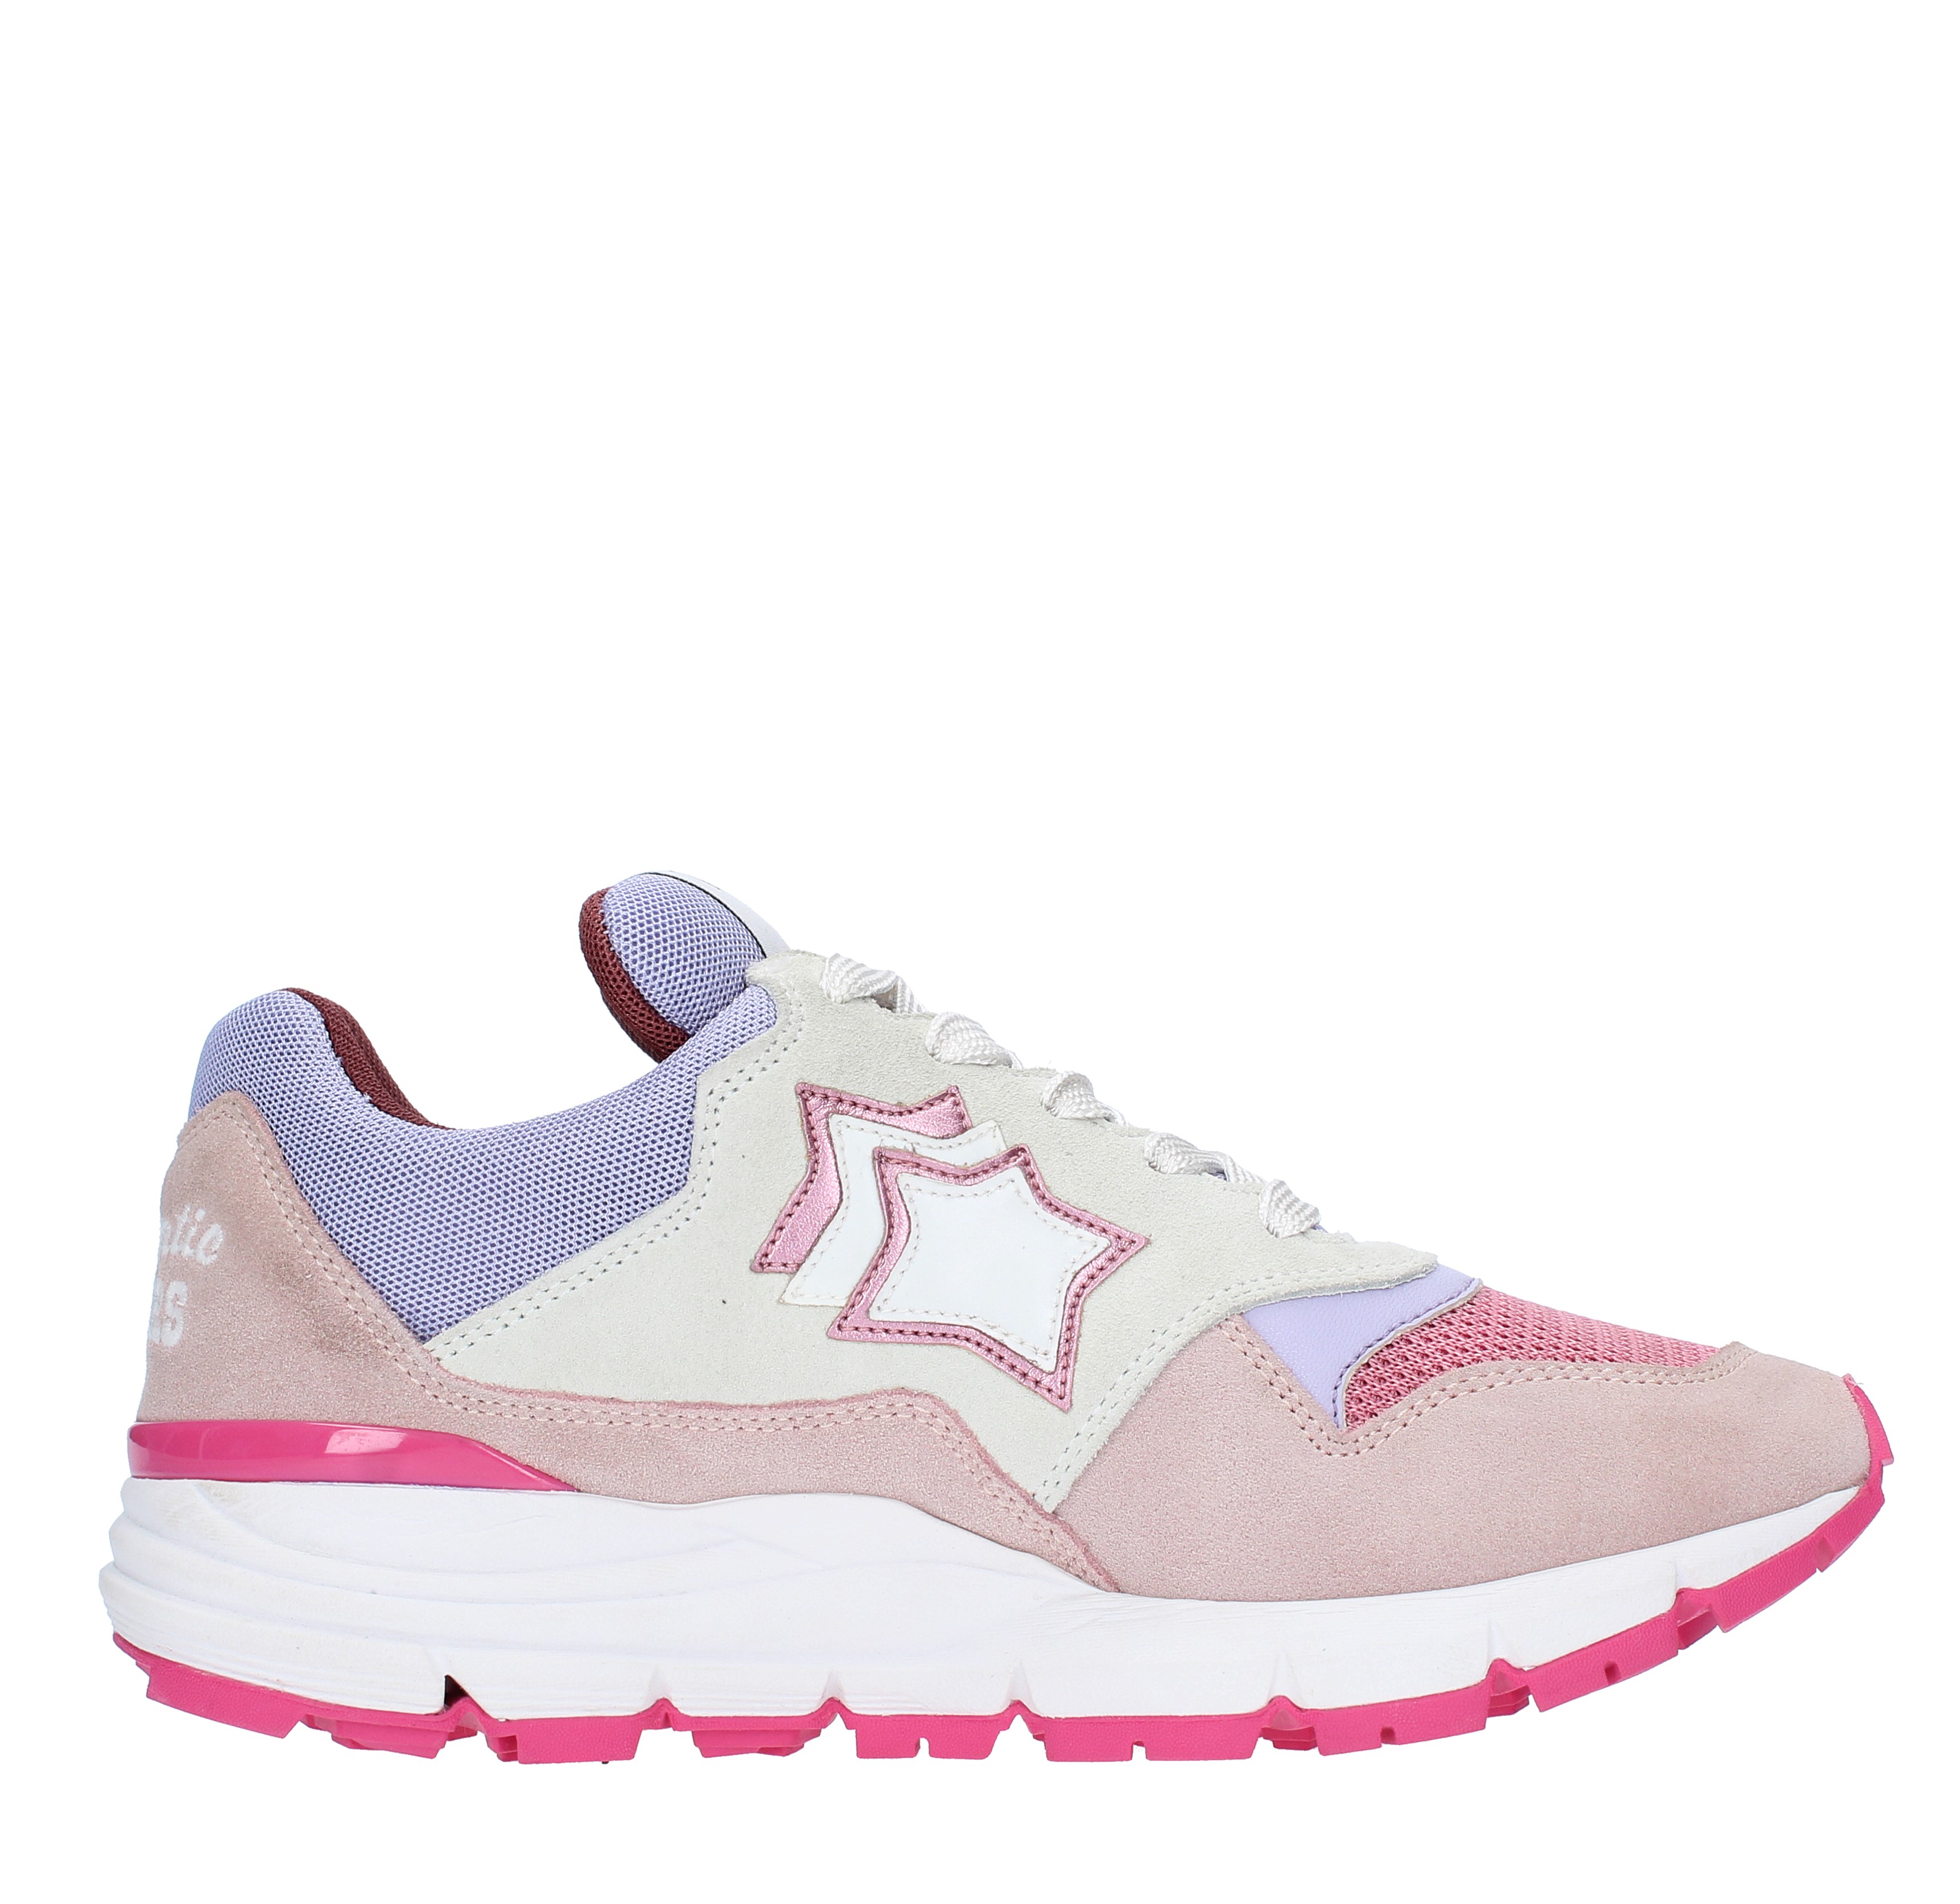 Sneakers in suede, fabric and leather ATLANTIC STARS | AGENA RCV-F16ROSA